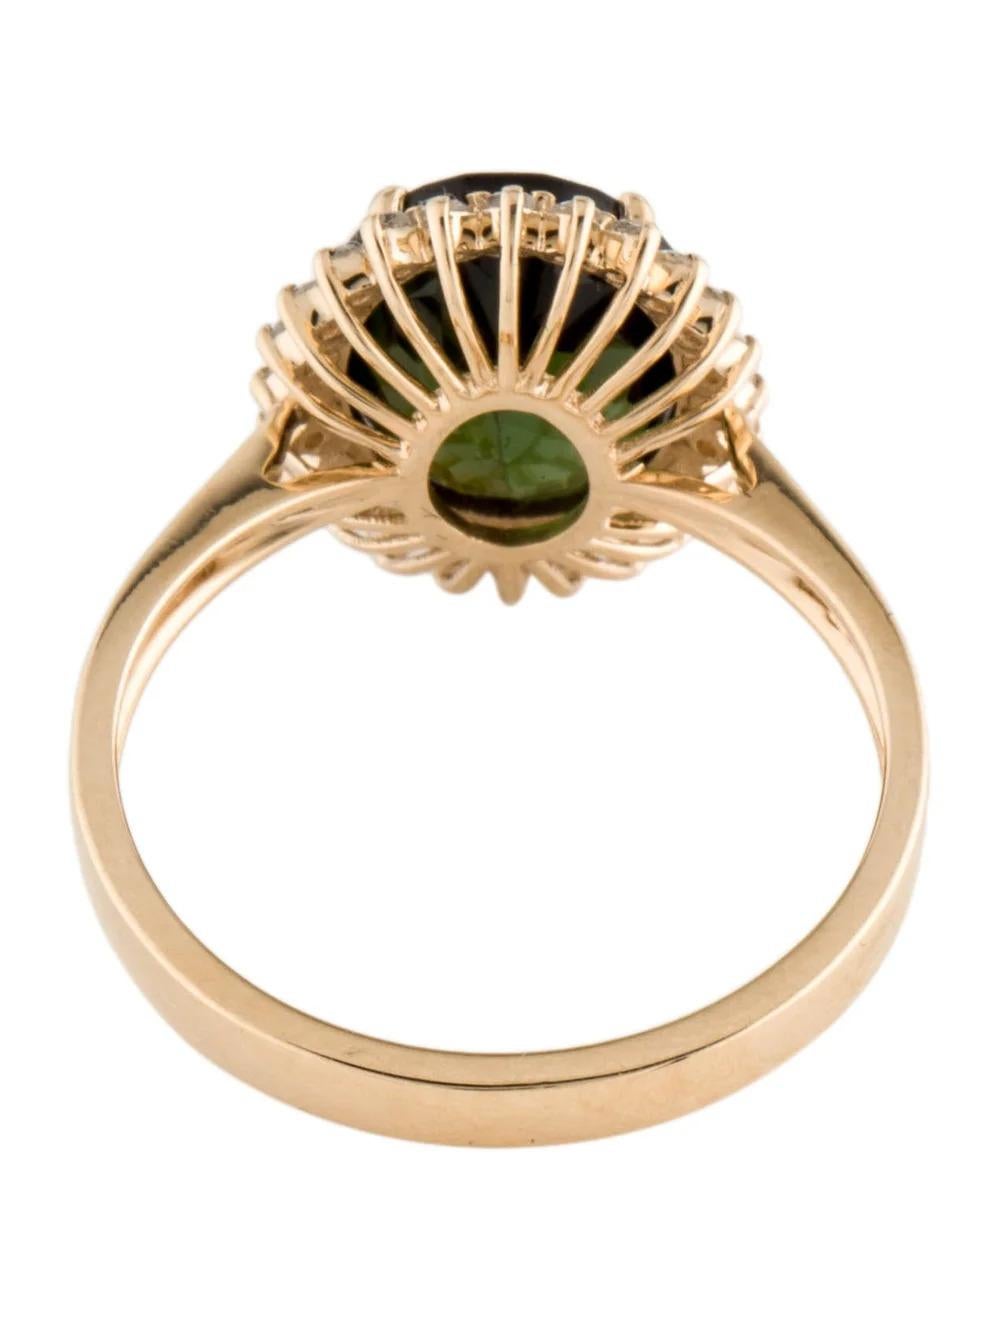 14K 3.42ctw Tourmaline Diamond Cocktail Ring Size 7.25 Yellow Gold Vintage In New Condition For Sale In Holtsville, NY